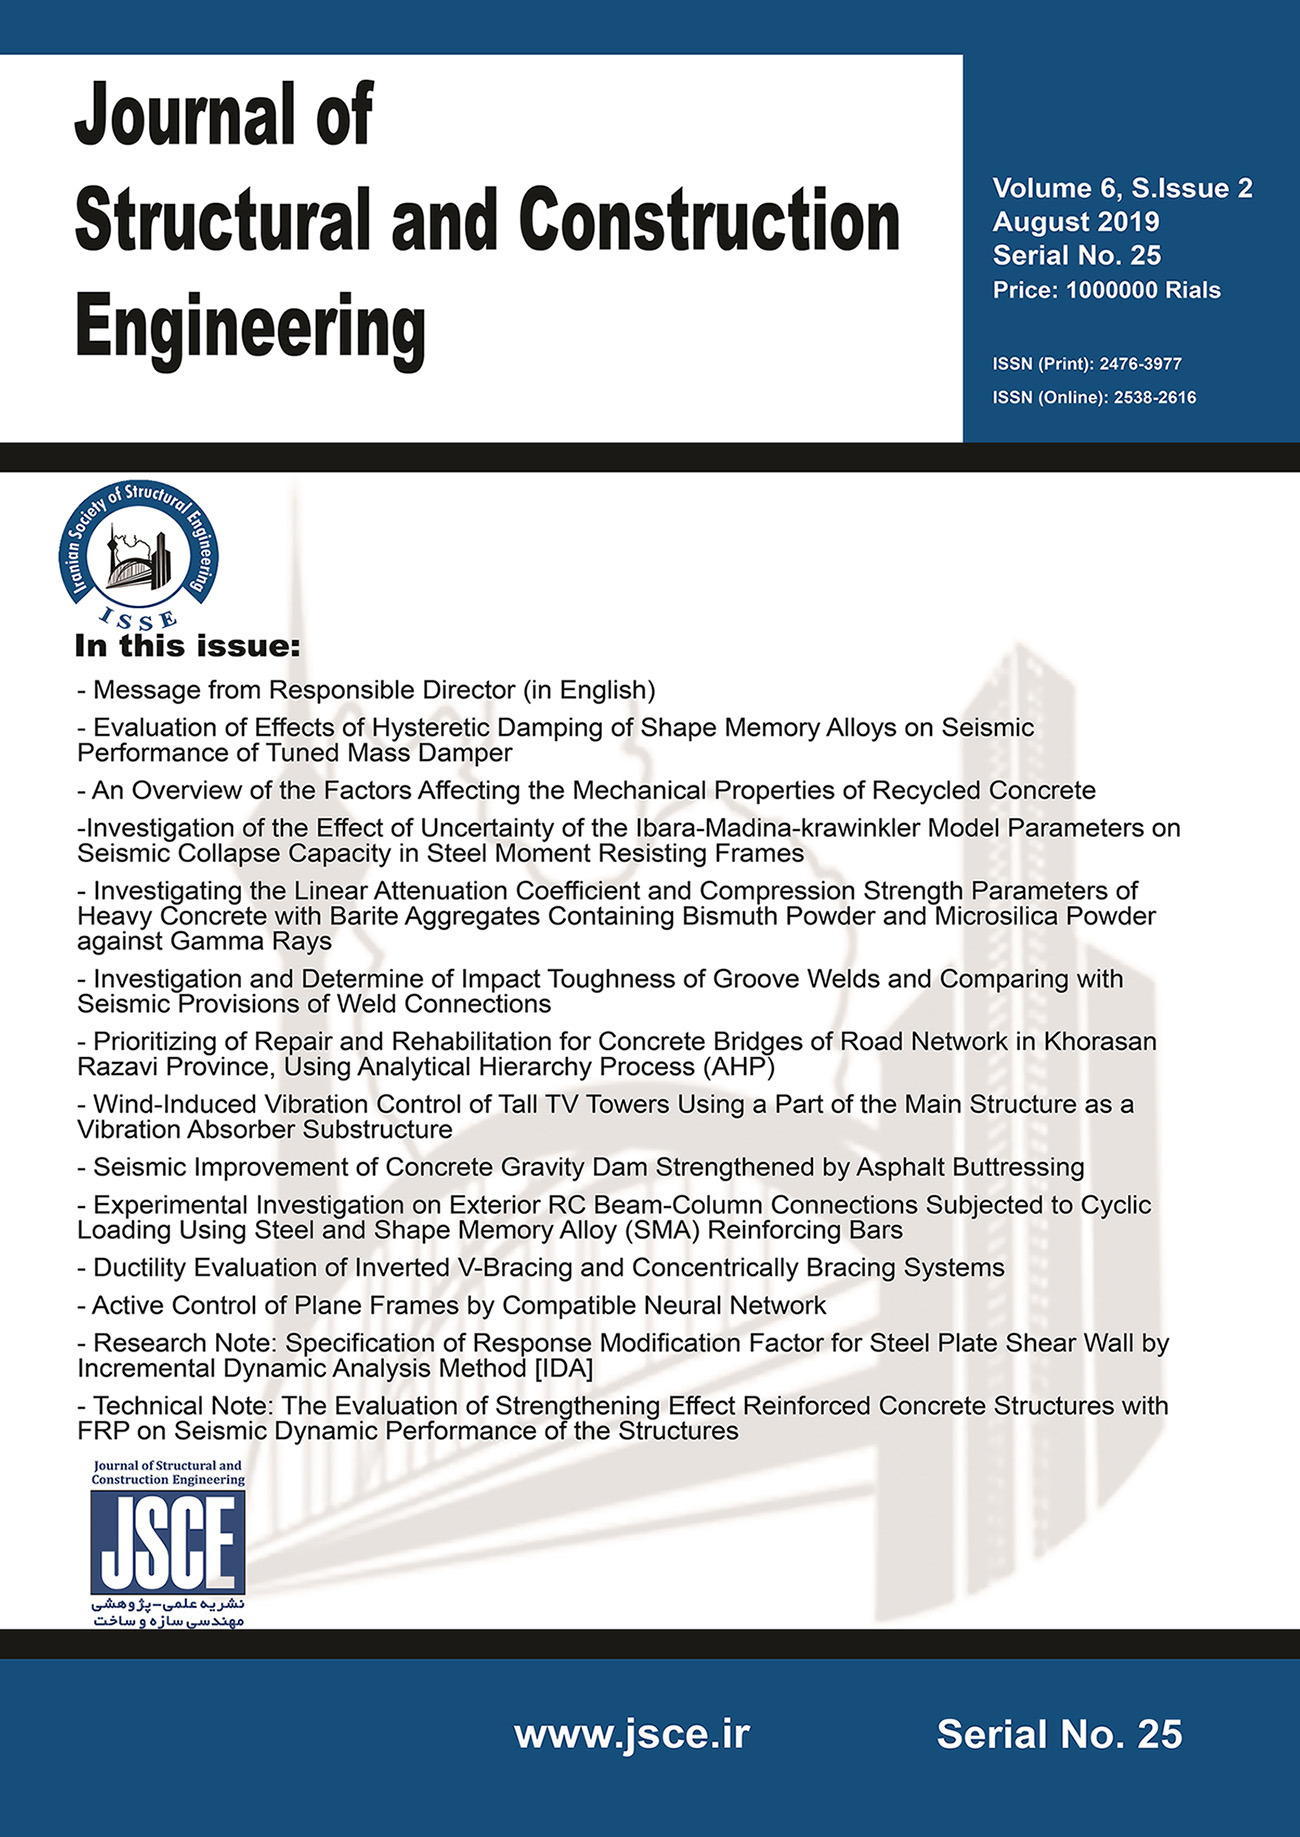 Journal of Structural and Construction Engineering